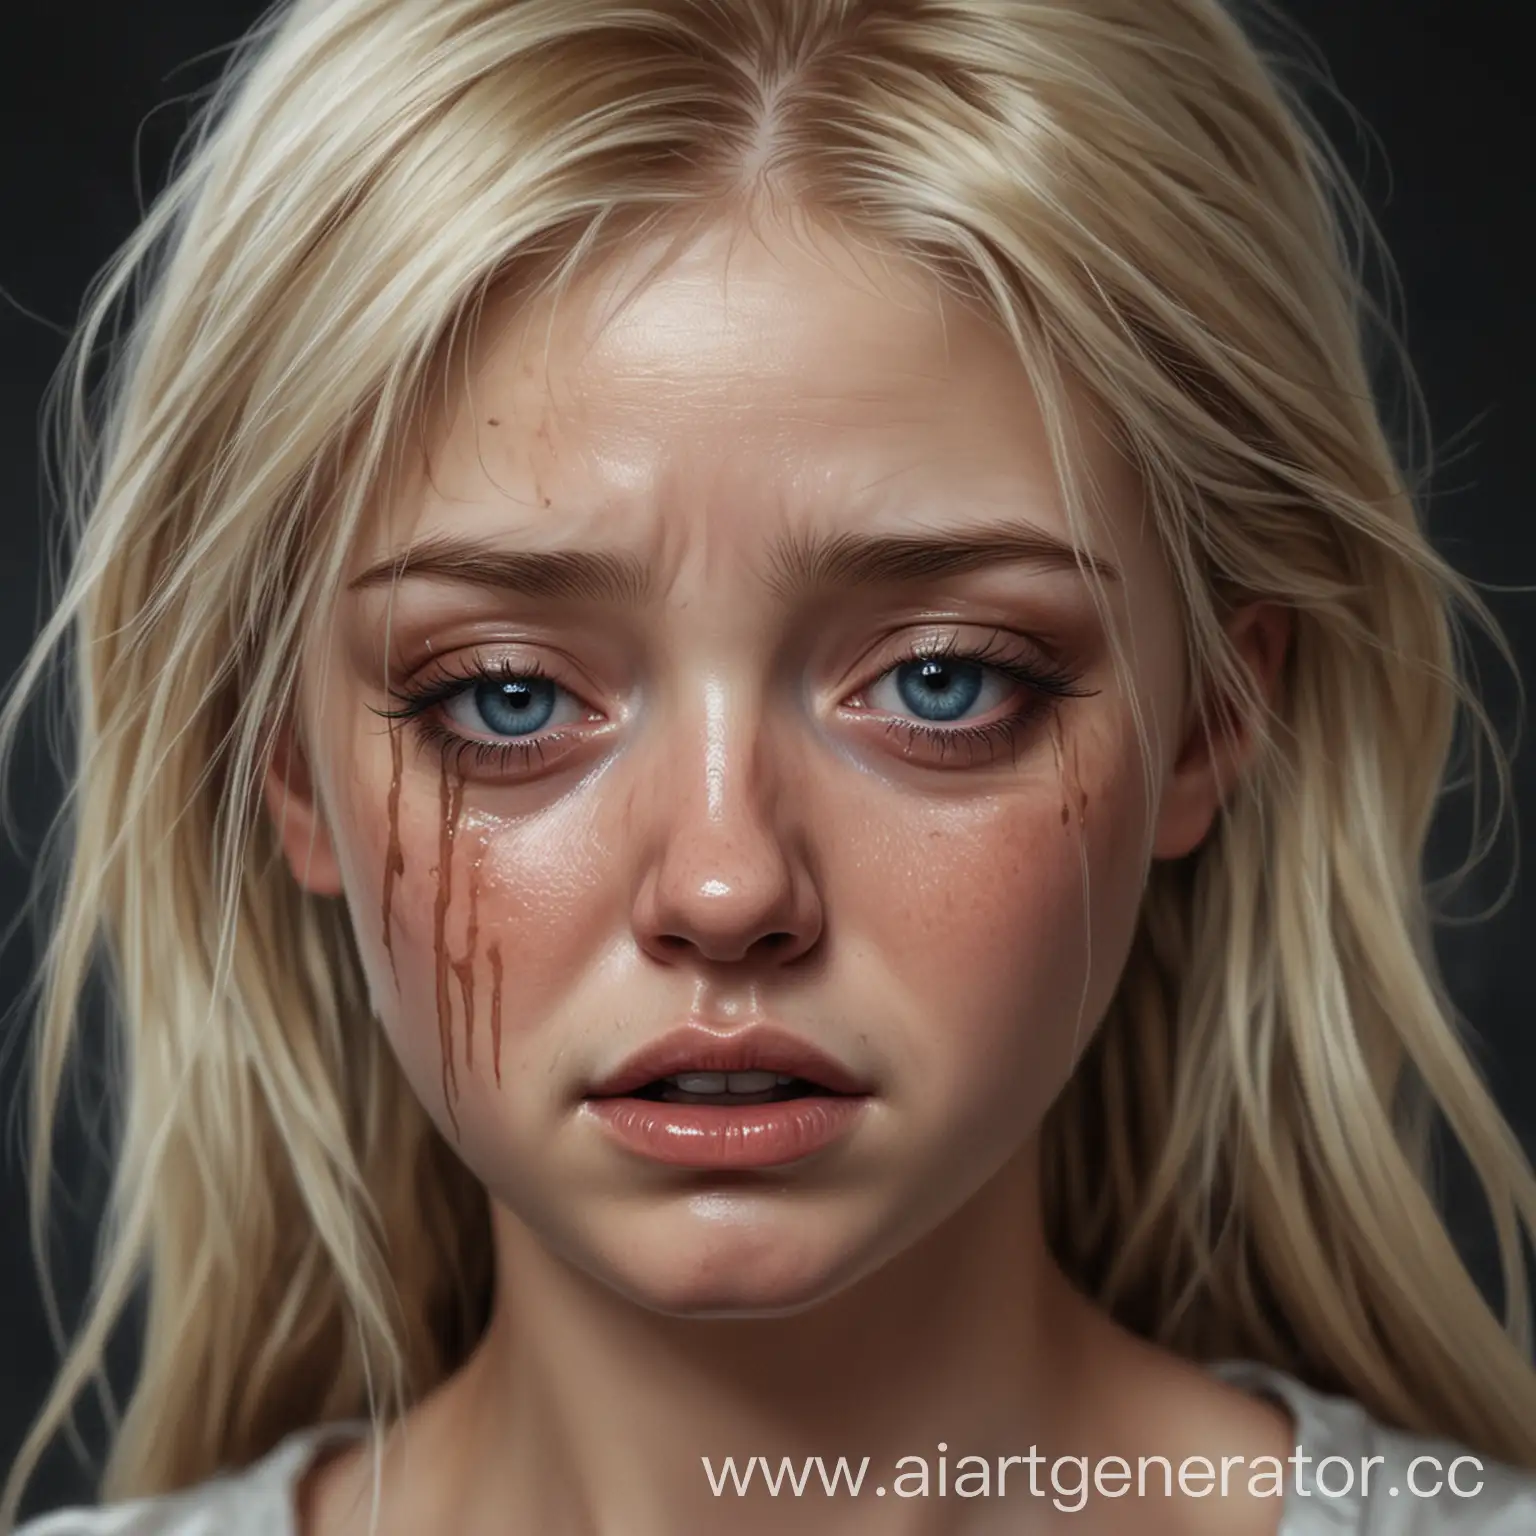 Realistic-Portrait-of-a-Distressed-Blonde-Girl-with-Smudged-Makeup-and-Blue-Eyes